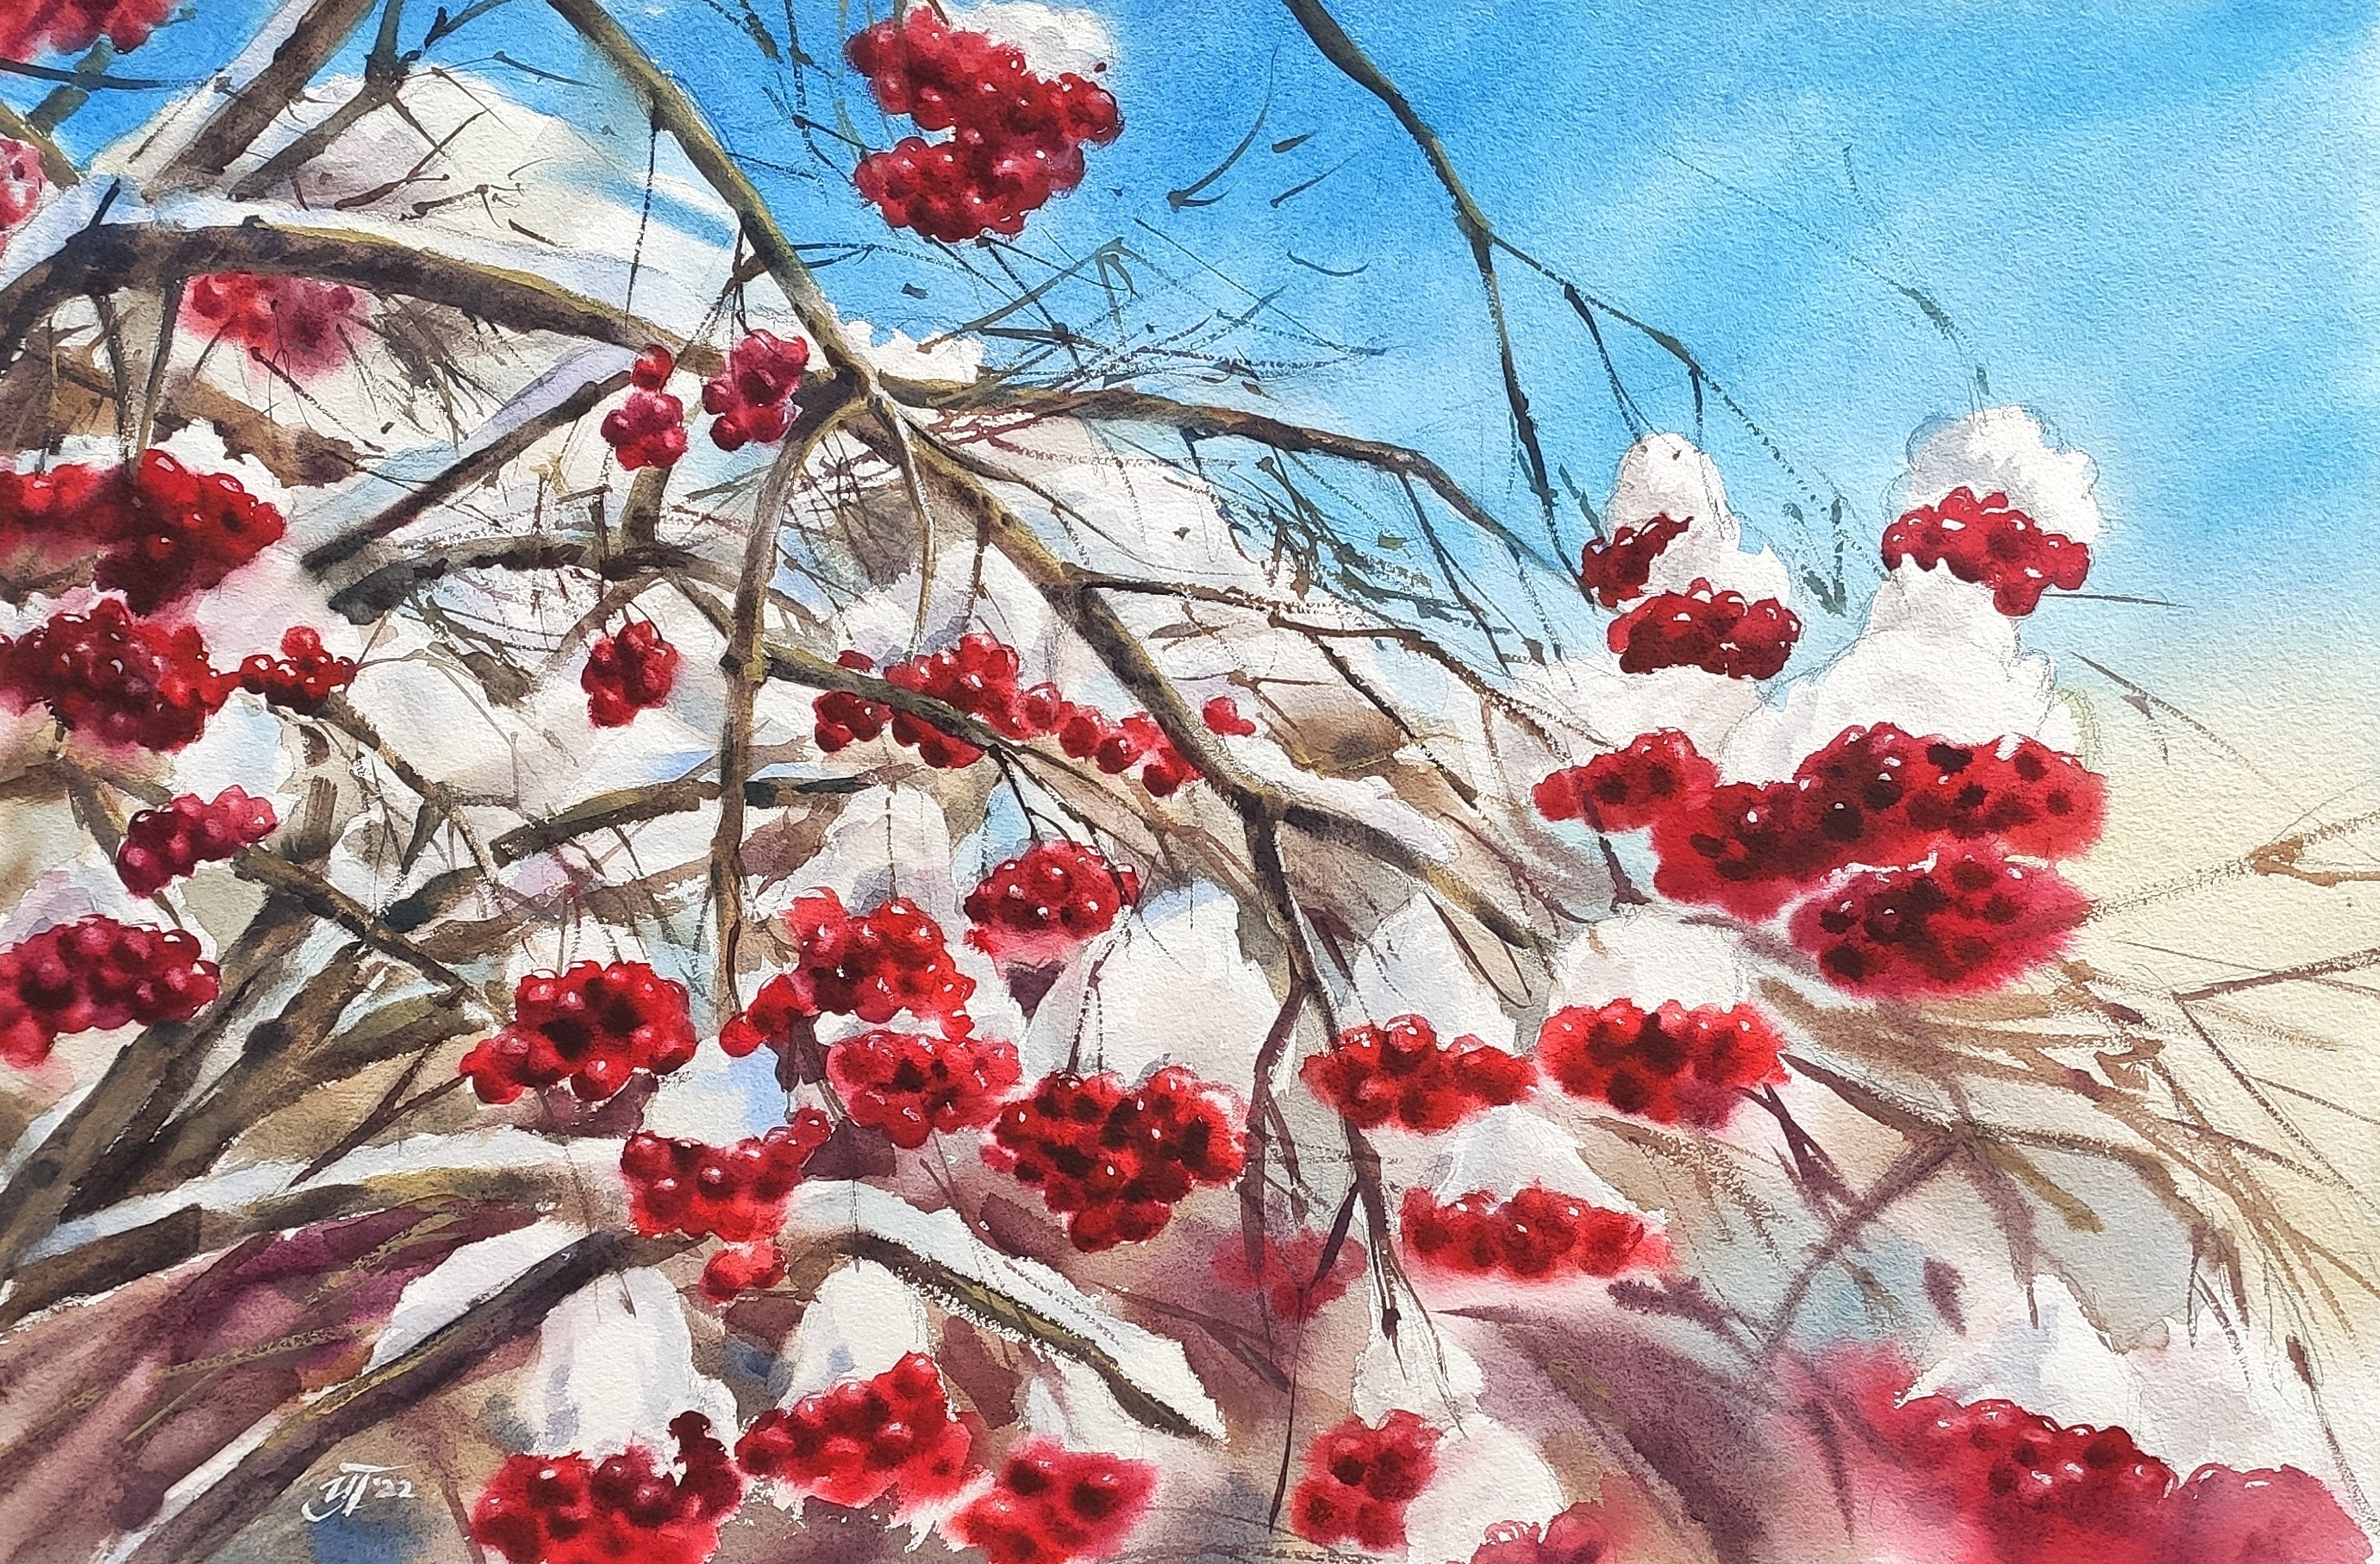 Winterberry: A fall and winter favorite